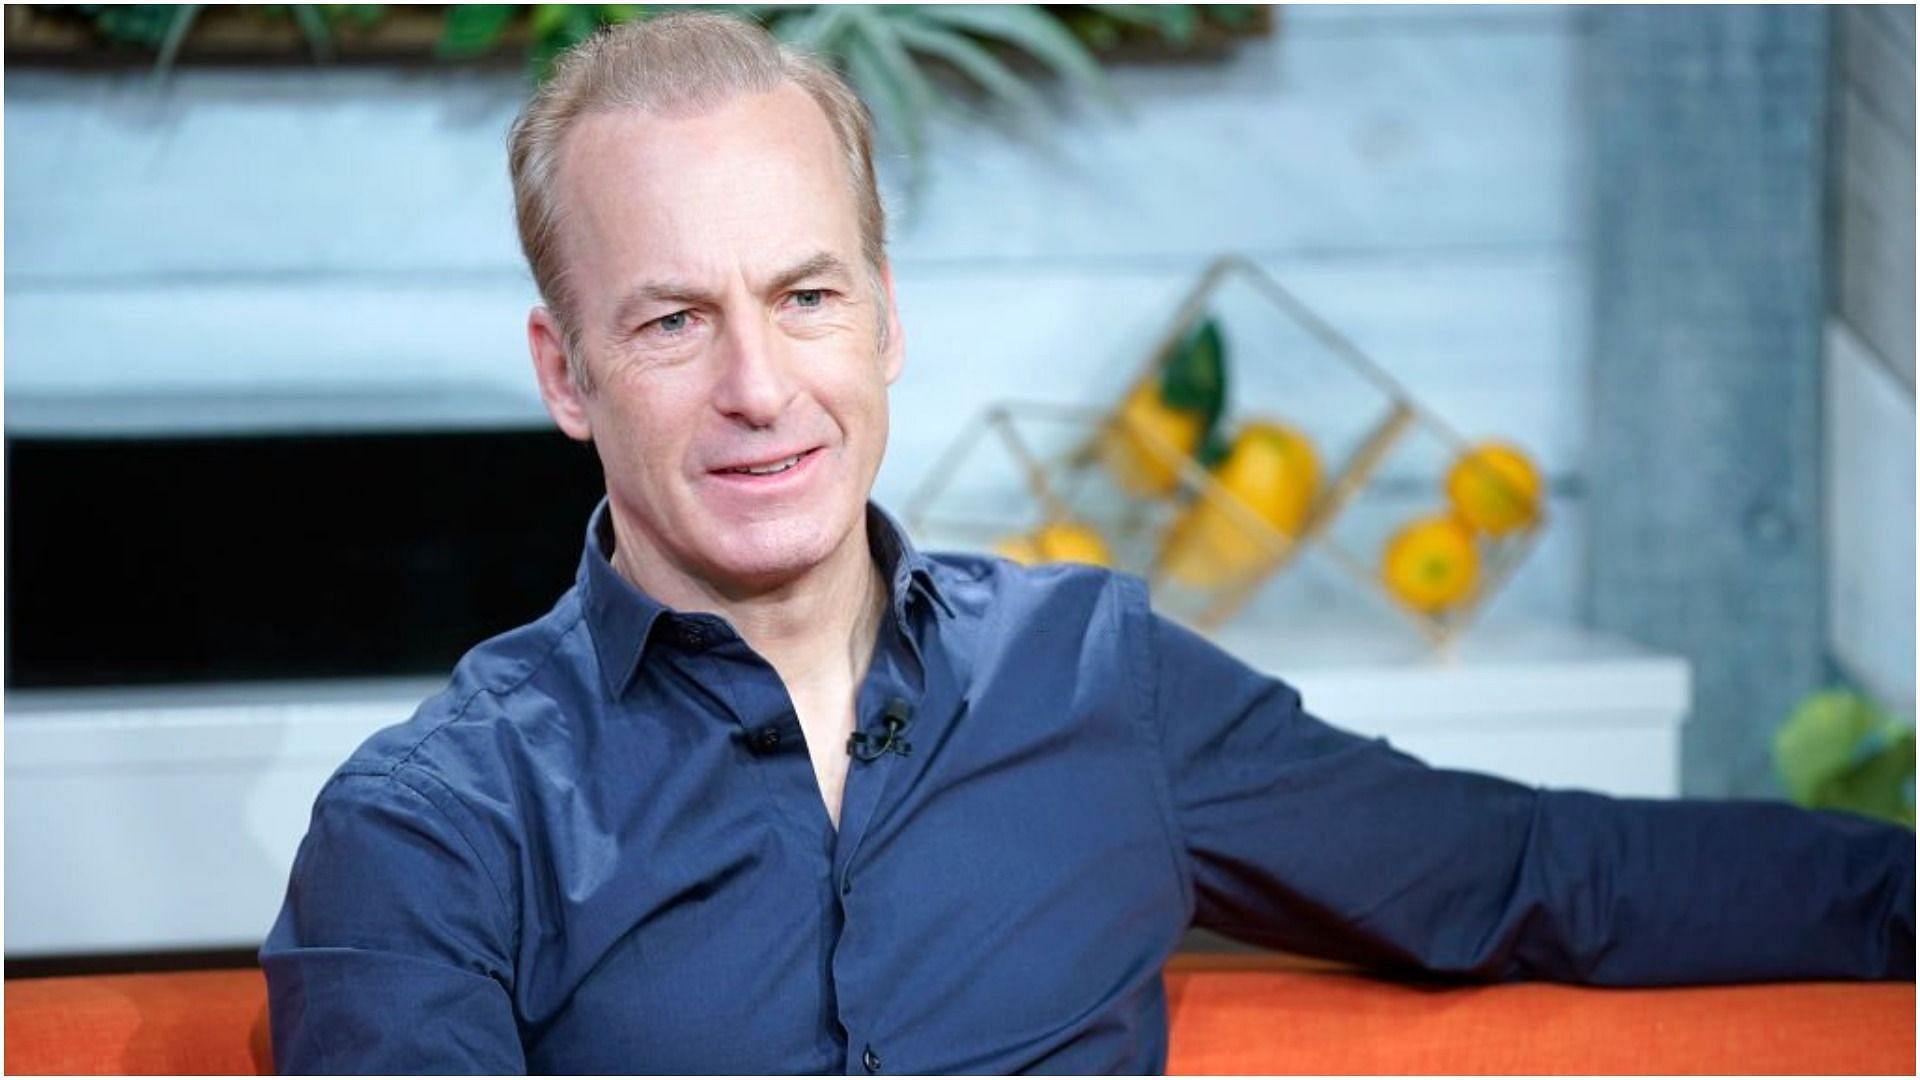 Bob Odenkirk is mostly known for his performance in Breaking Bad (Image via John Lamparski/Getty Images)